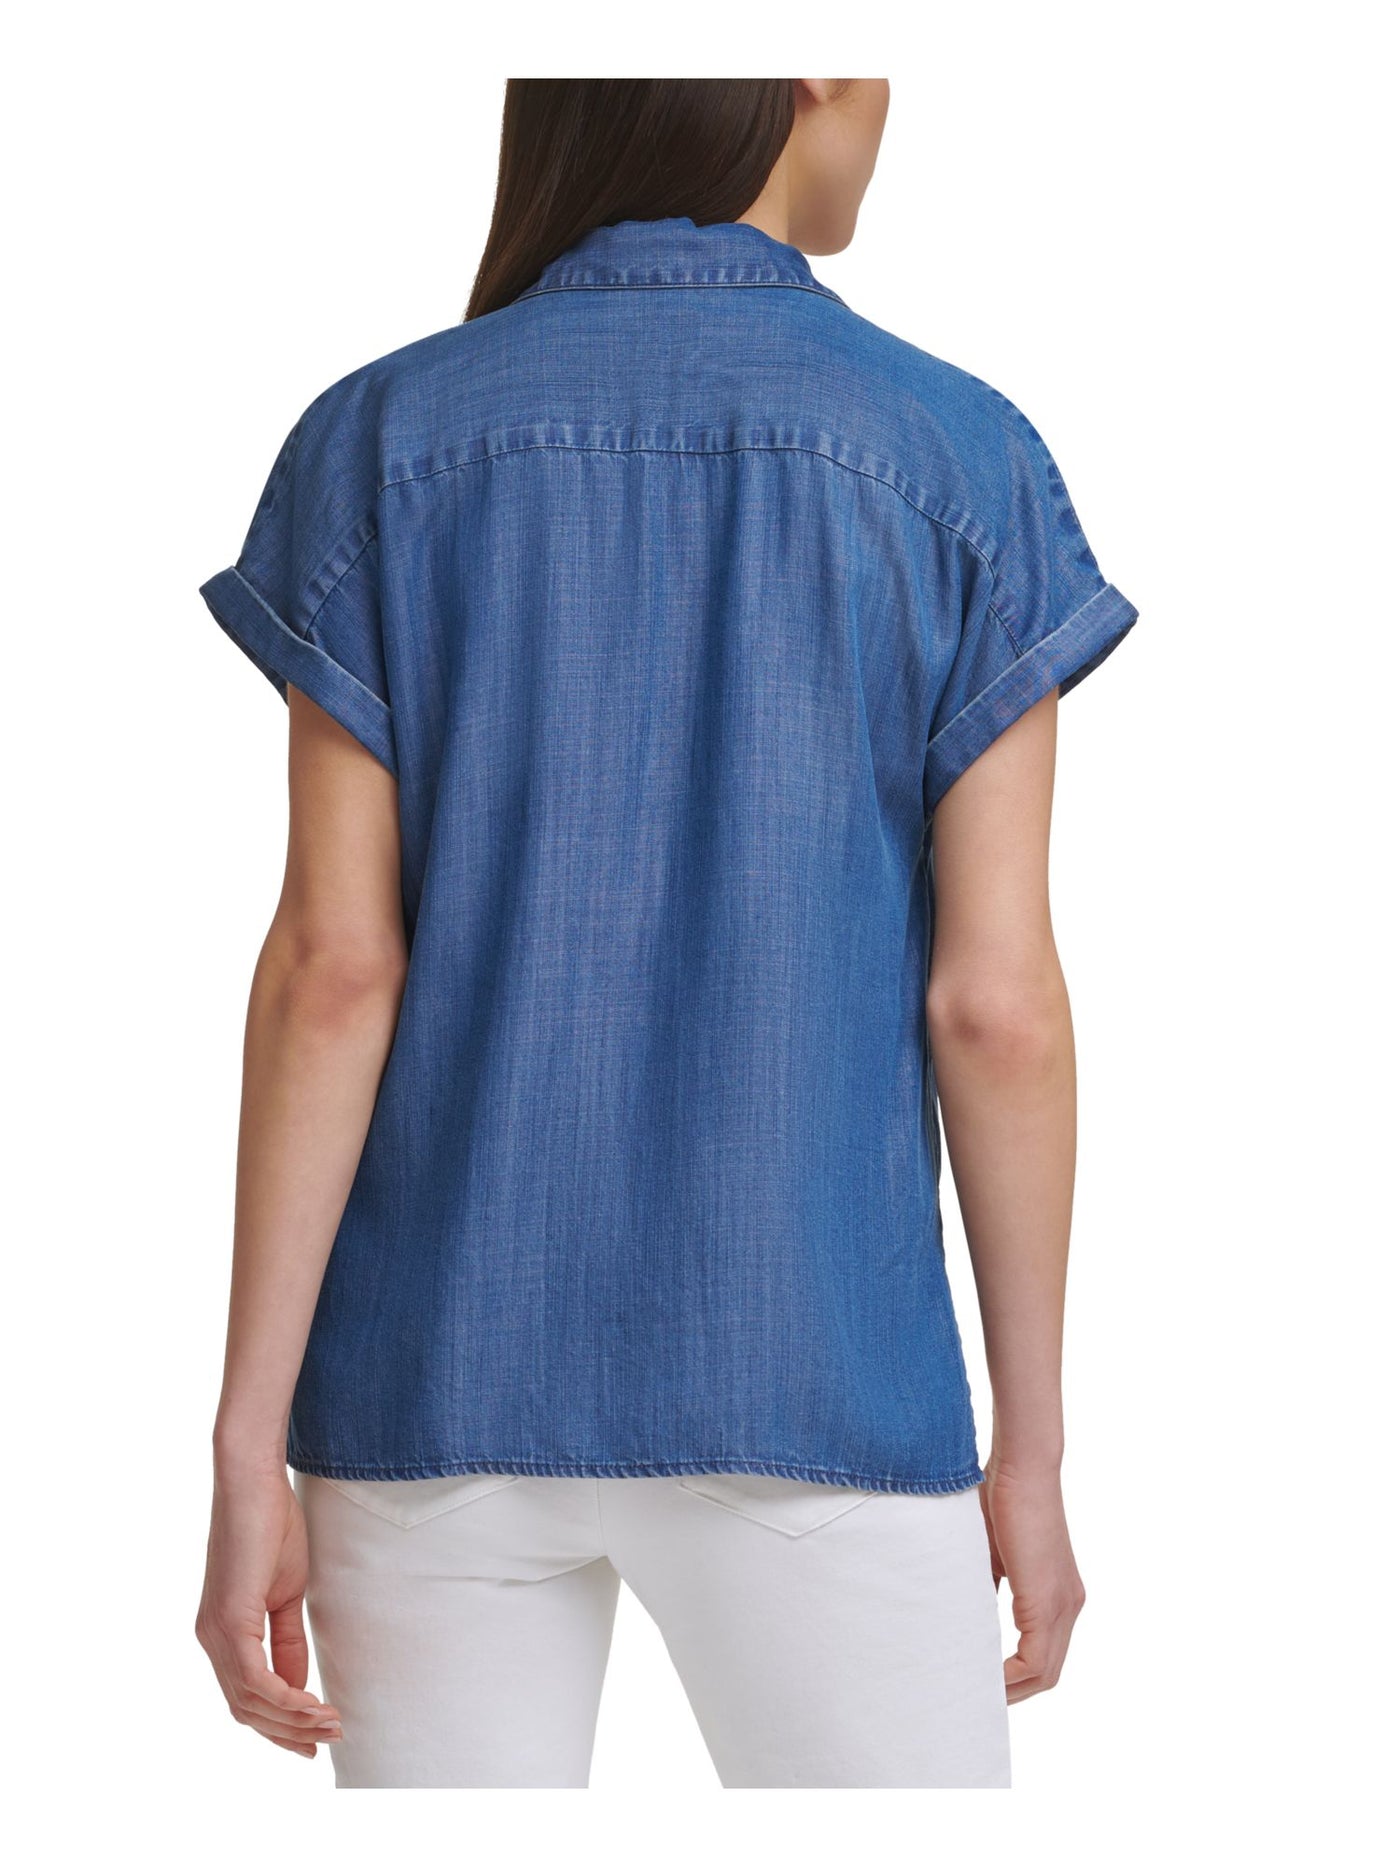 CALVIN KLEIN Womens Blue Pocketed Short Sleeve Collared Button Up Top XS